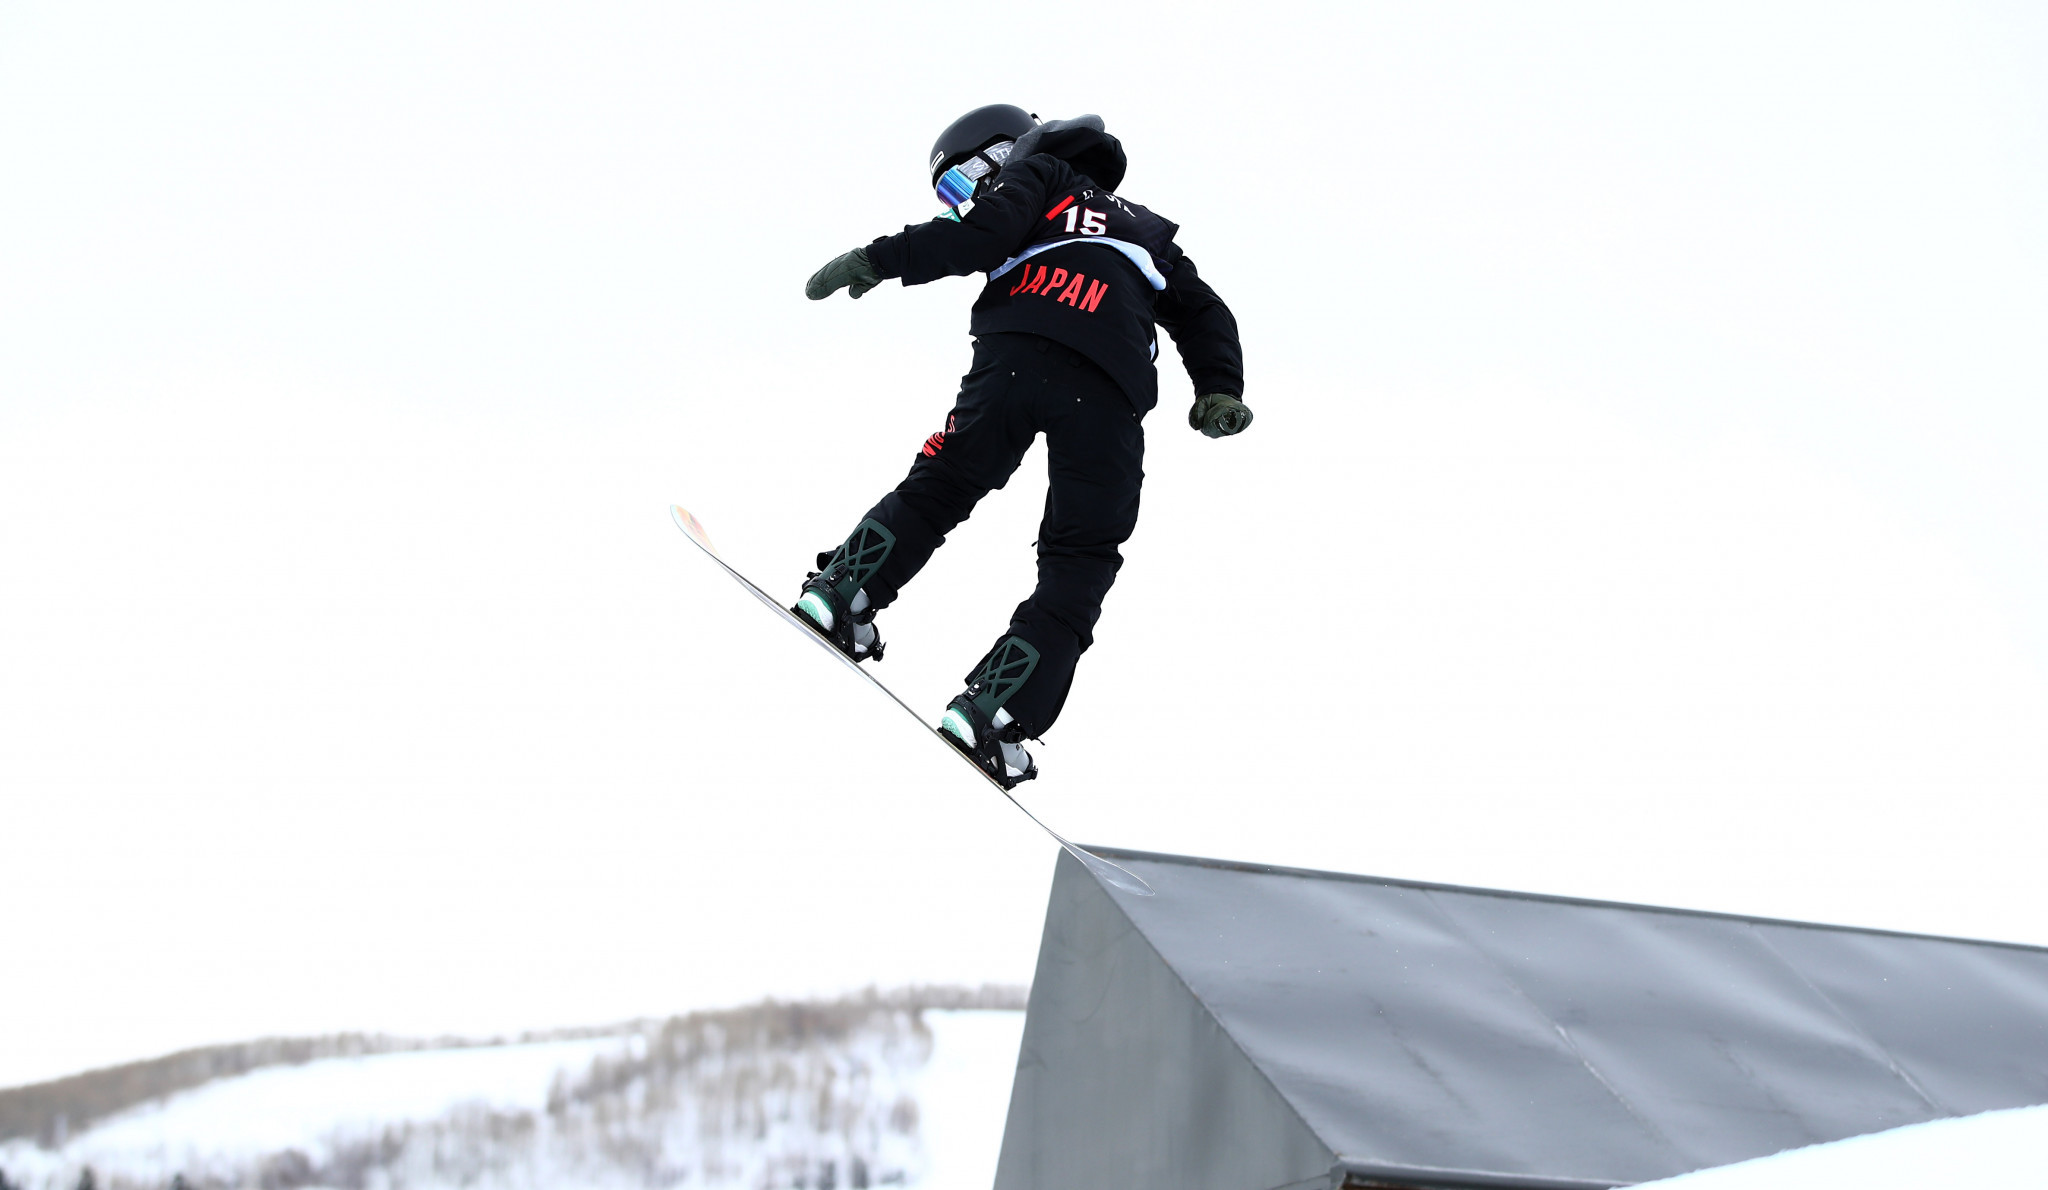 Japan's Hiroaki Kunitake performed strongly in men's slopestyle qualification at the FIS Snowboard World Cup in Seiser Alm ©Getty Images